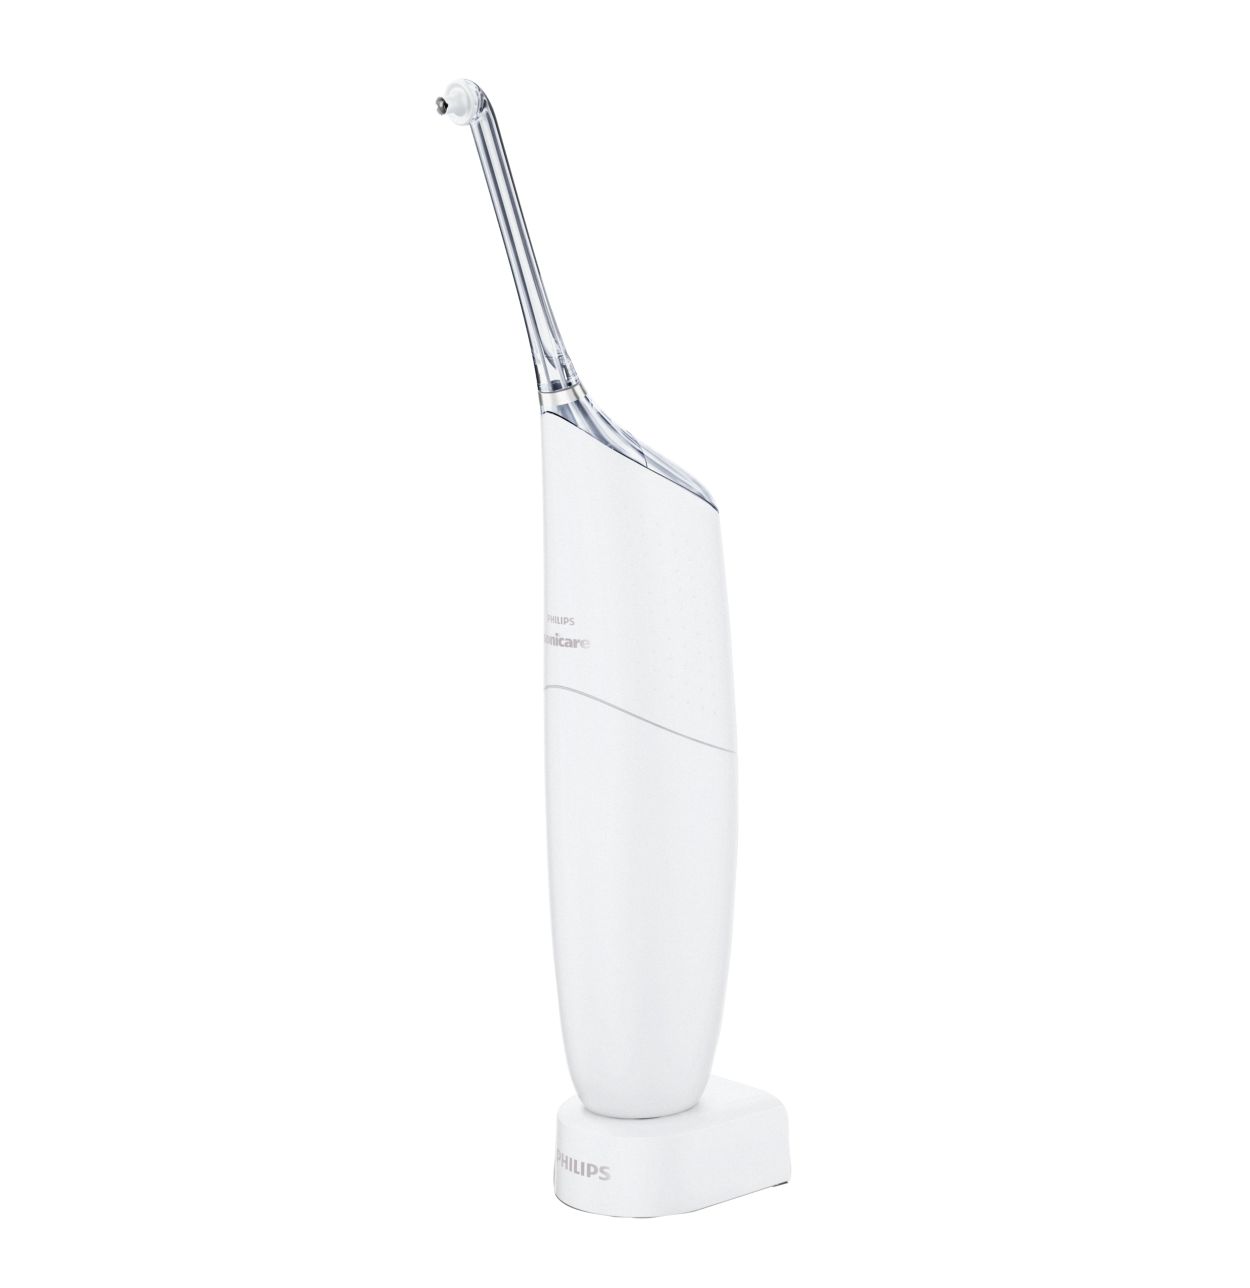 Philips Airfloss Electric Toothbrush